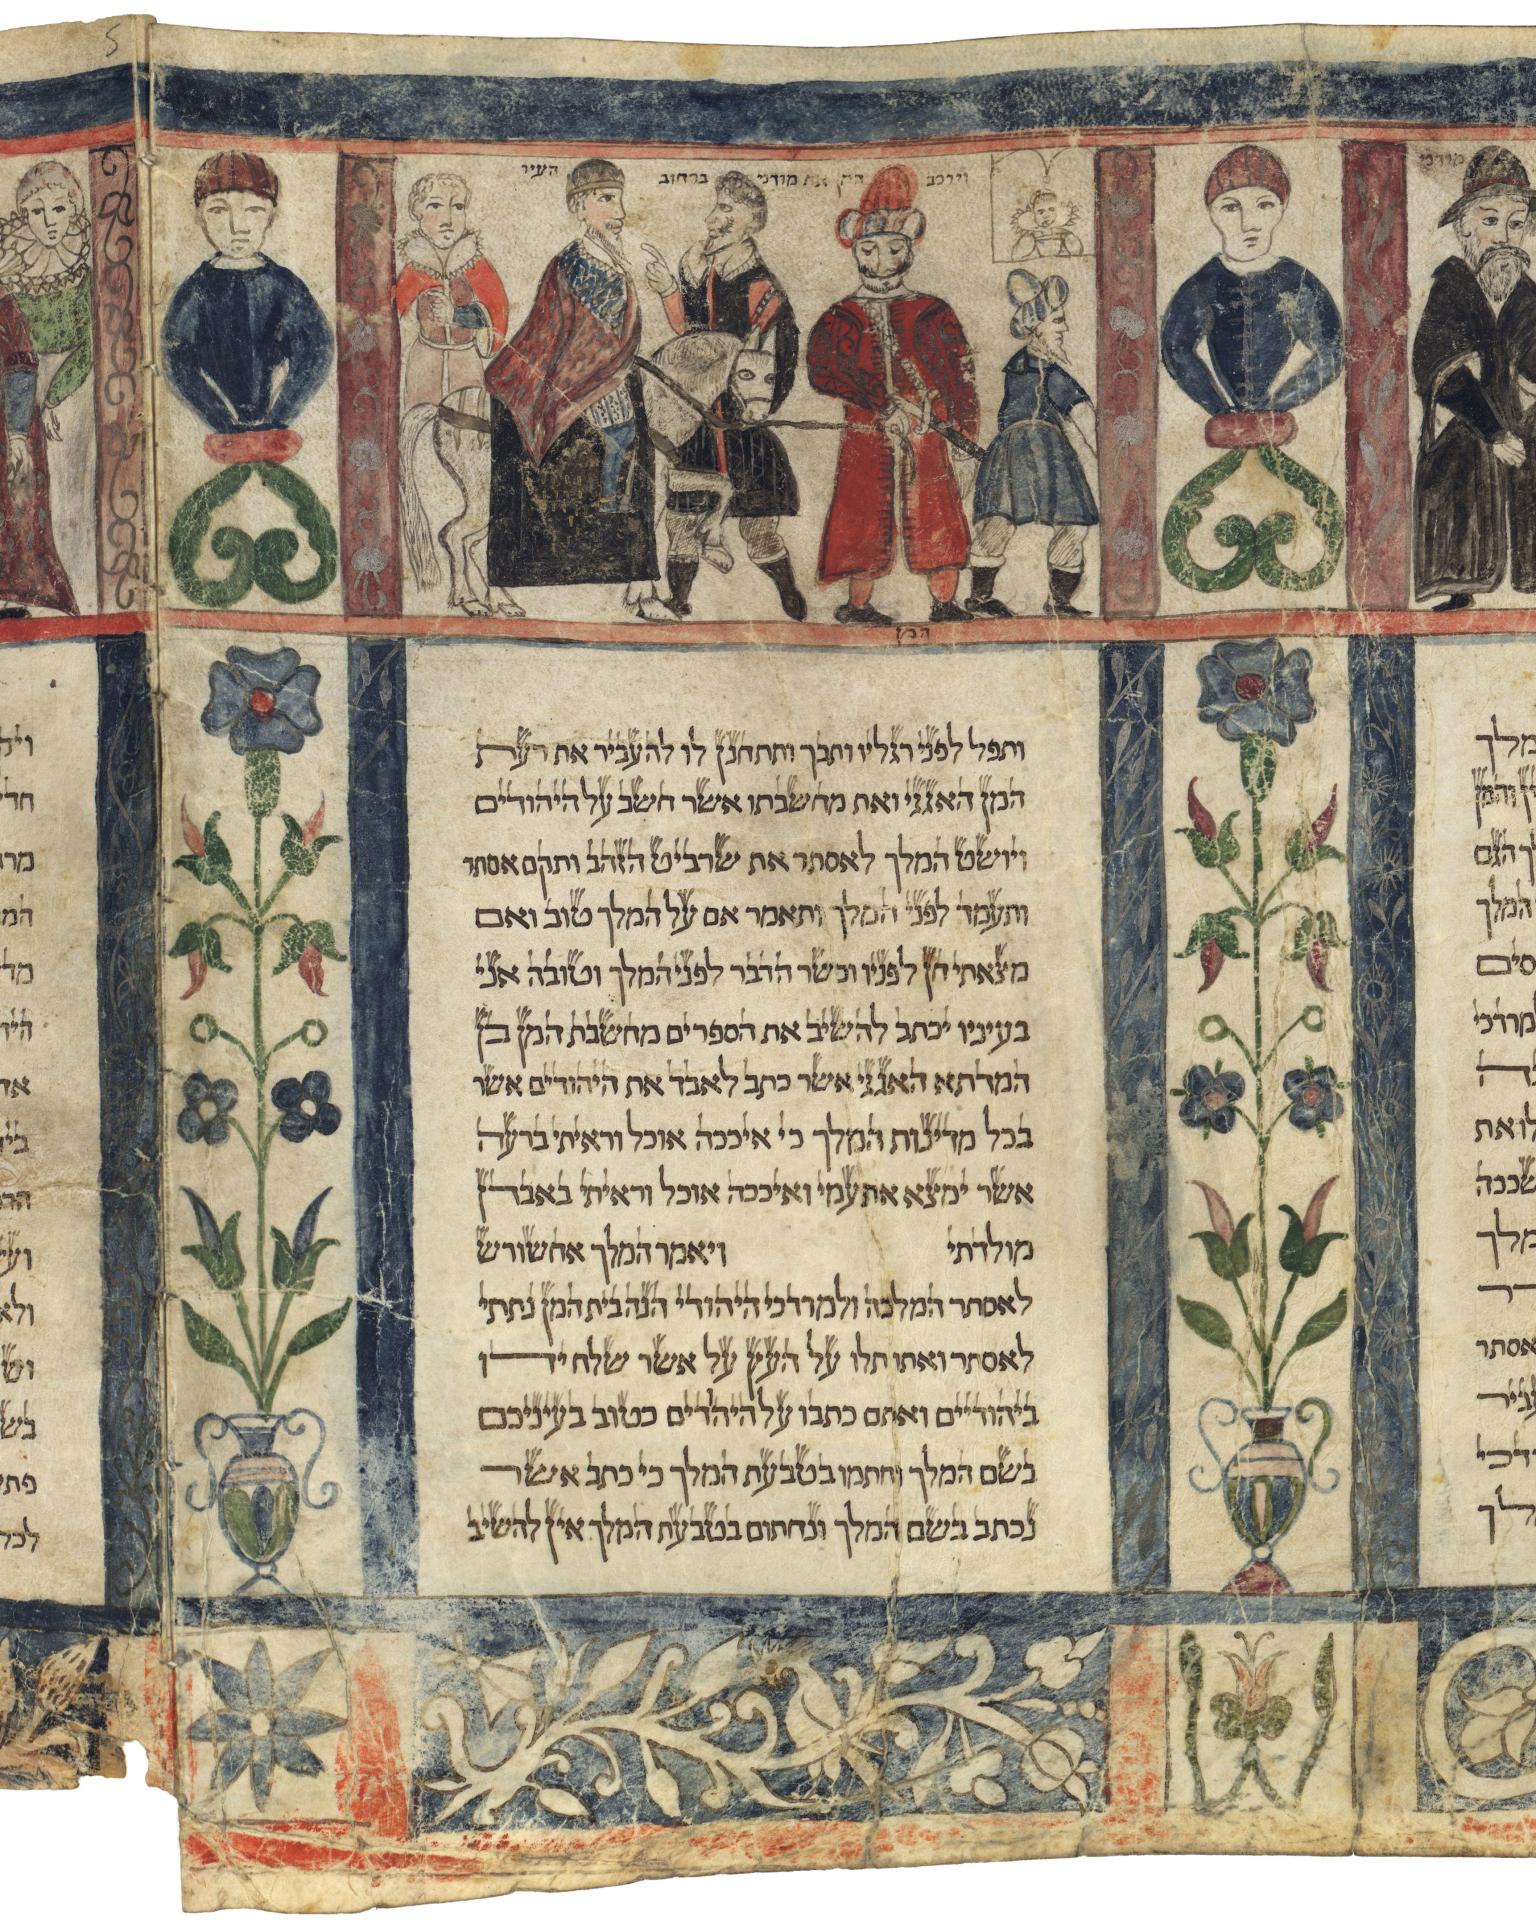 Manuscript scroll page of Hebrew text with illustrated figures, one on horseback, on top. 